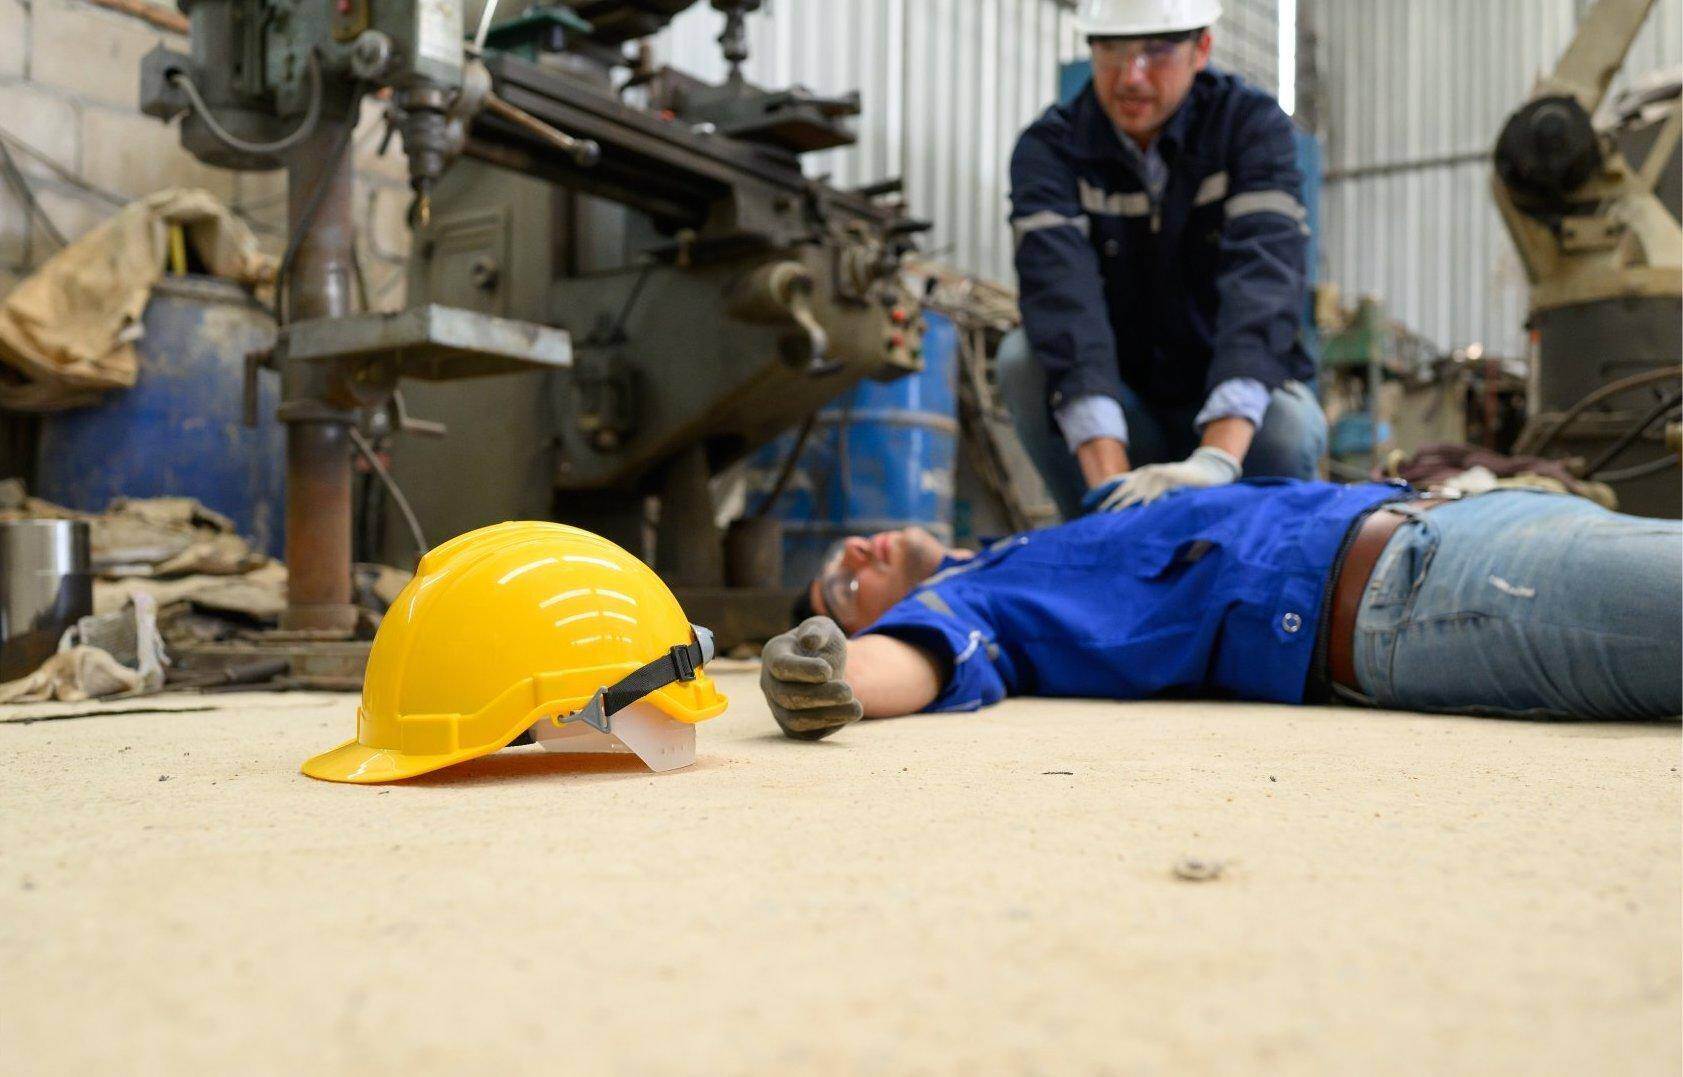 An unconscious man who has been injured on the job who will file for workers compensation in Richmond Hill, Georgia